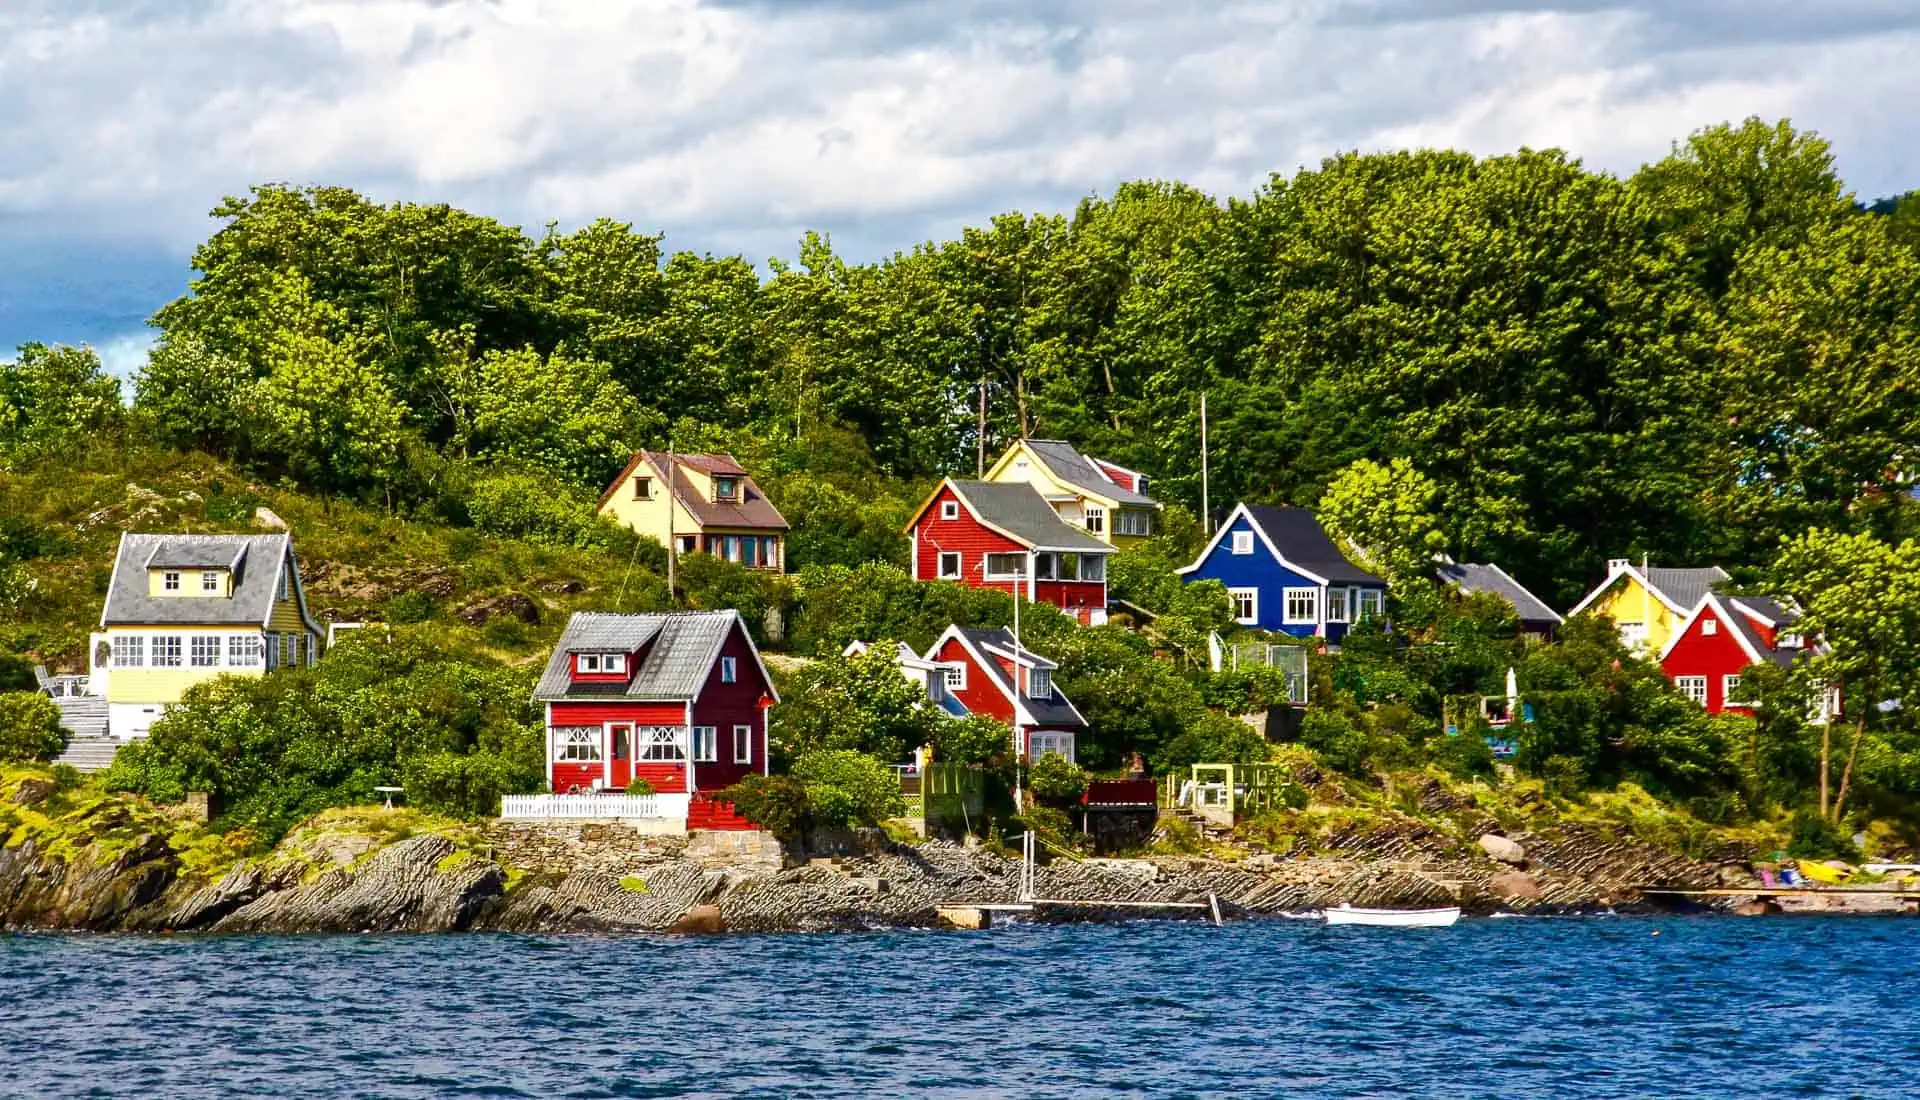 See the colourful summer cottages that dot the islands of Oslofjord during an Oslo city break.